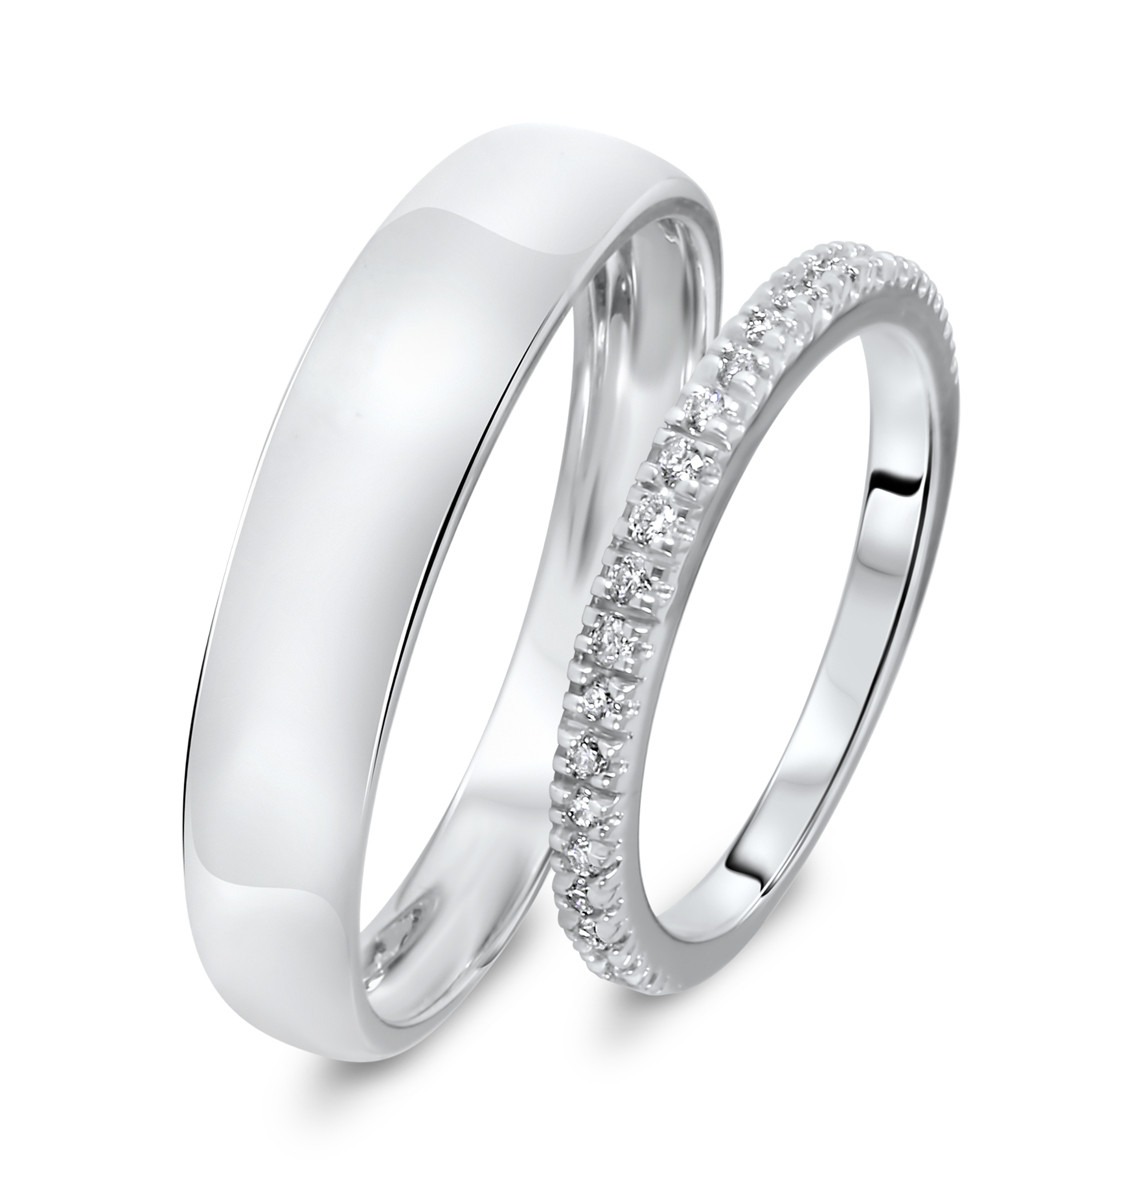 White Gold Wedding Ring Sets His And Hers
 1 4 Carat T W Round Cut Diamond His And Hers Wedding Band